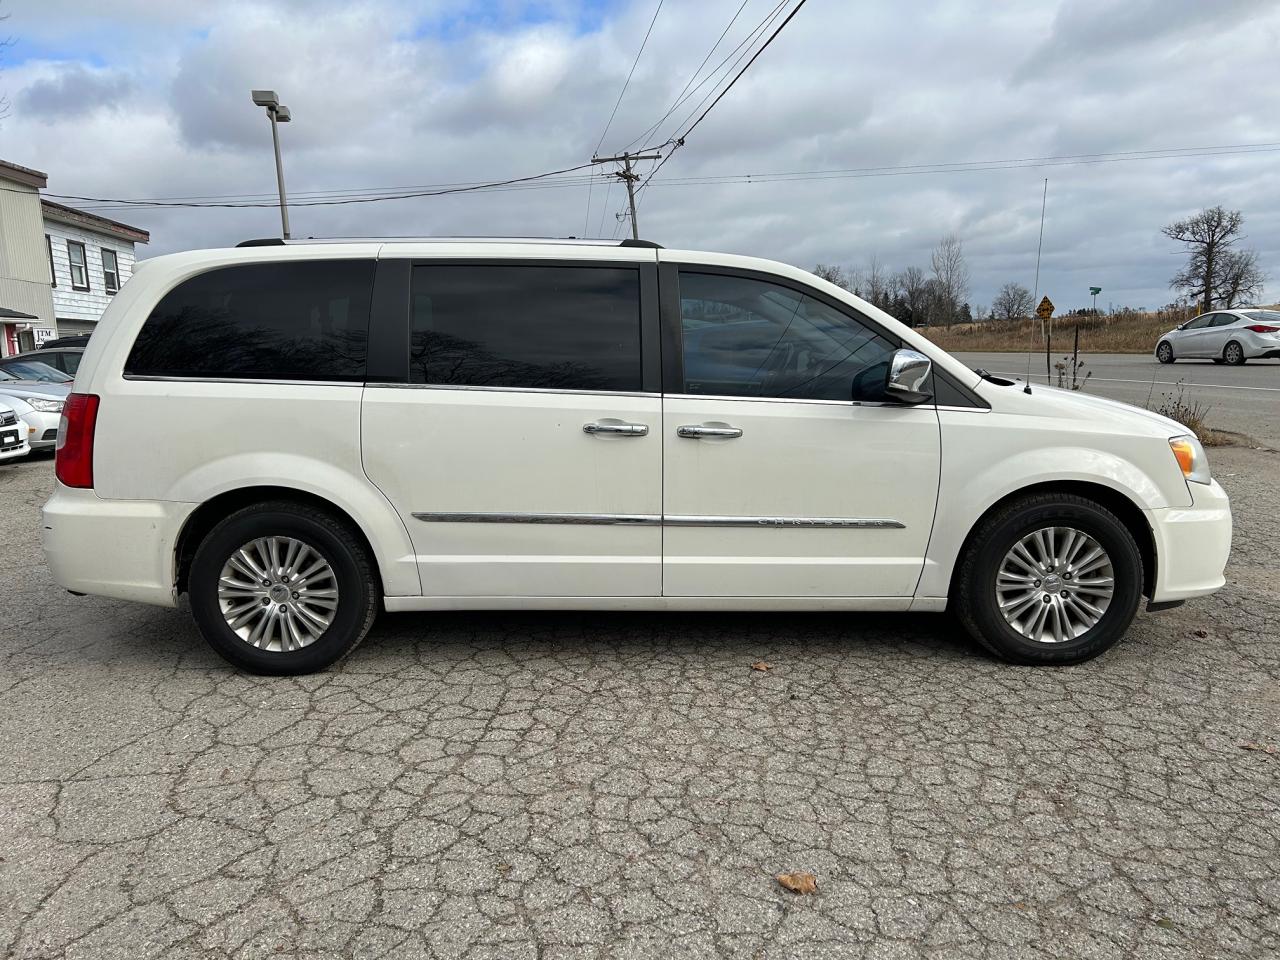 2012 Chrysler Town & Country Ltd*Runs&Drive Great*7 Pass*226 Kms*No Accidents* - Photo #4